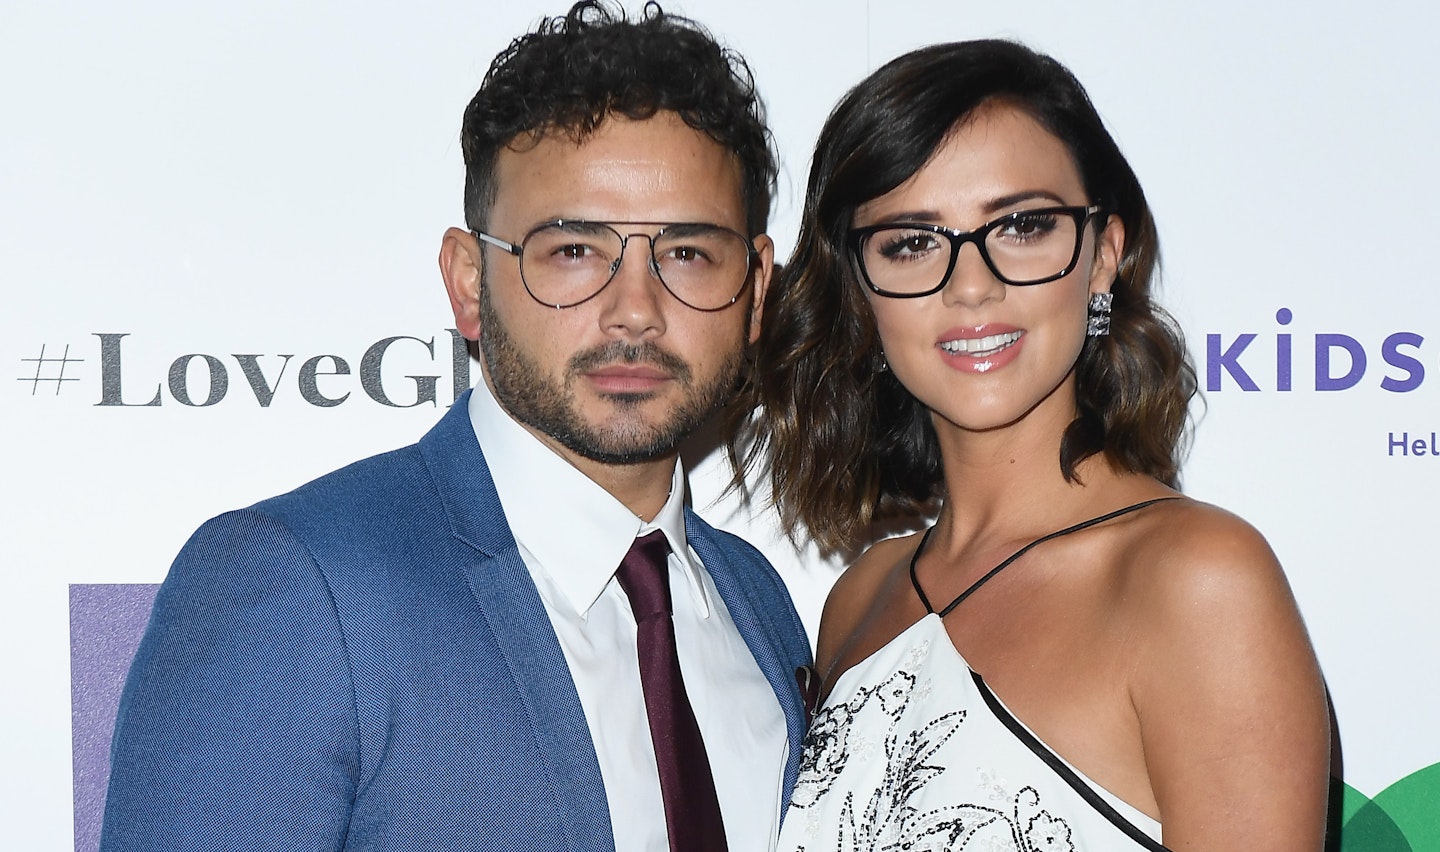 Ryan Thomas and Lucy Mecklenburgh